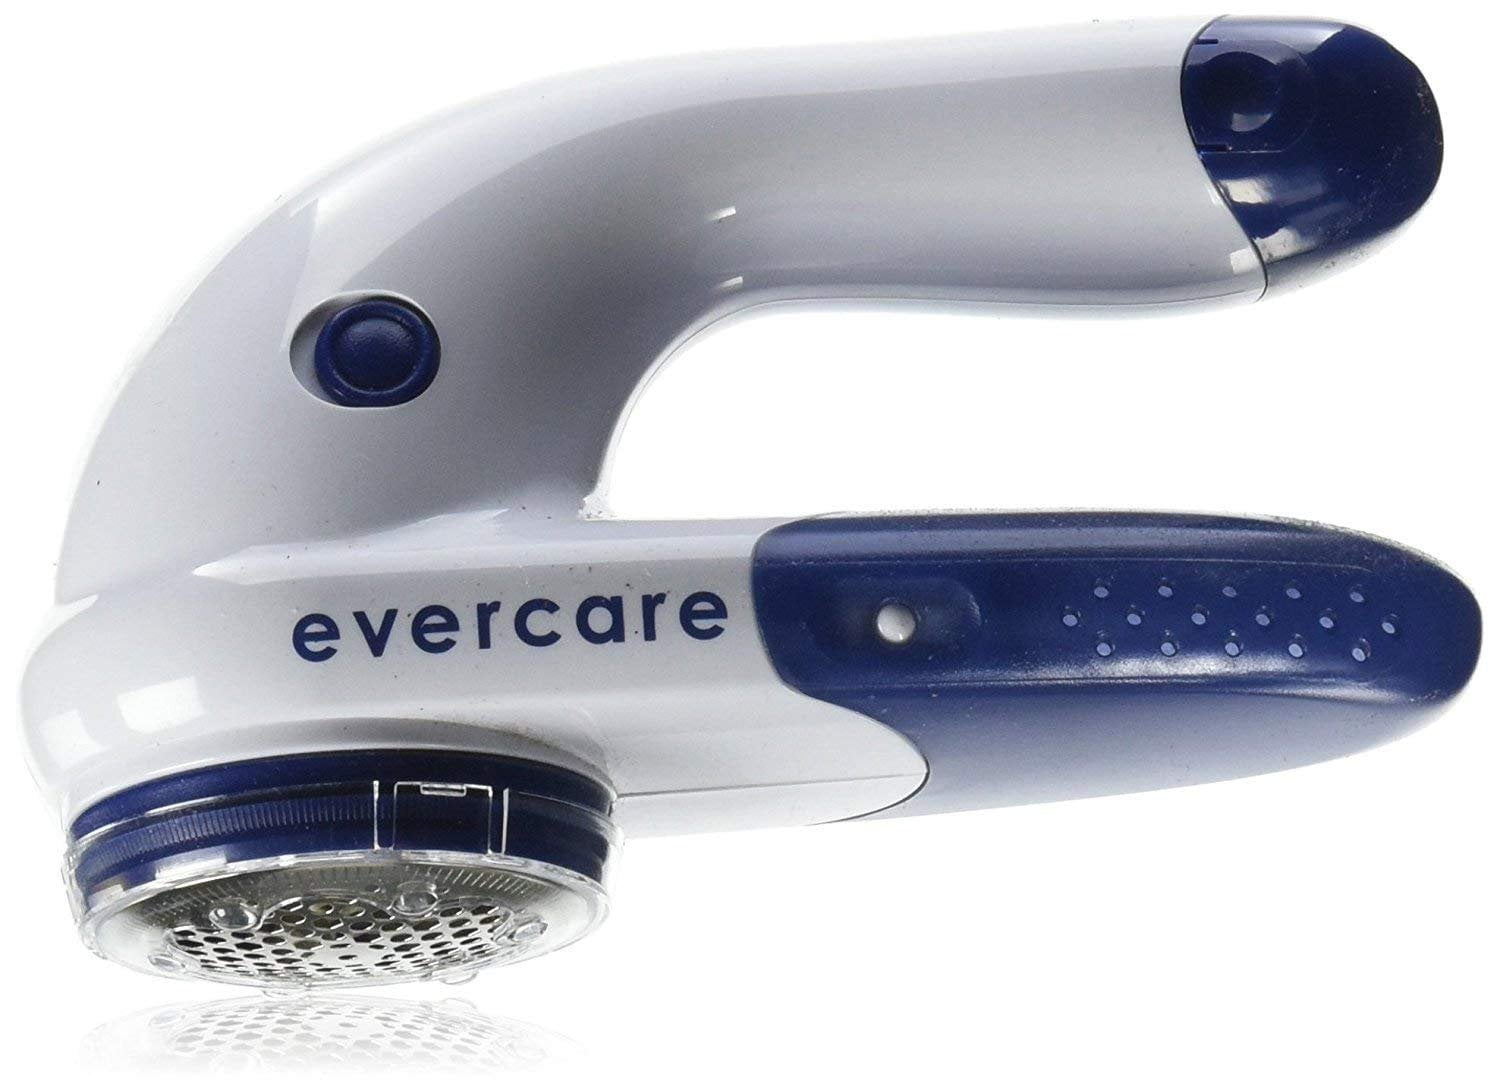 Reviewing Fabric Shavers on Cashmere! Do they work?